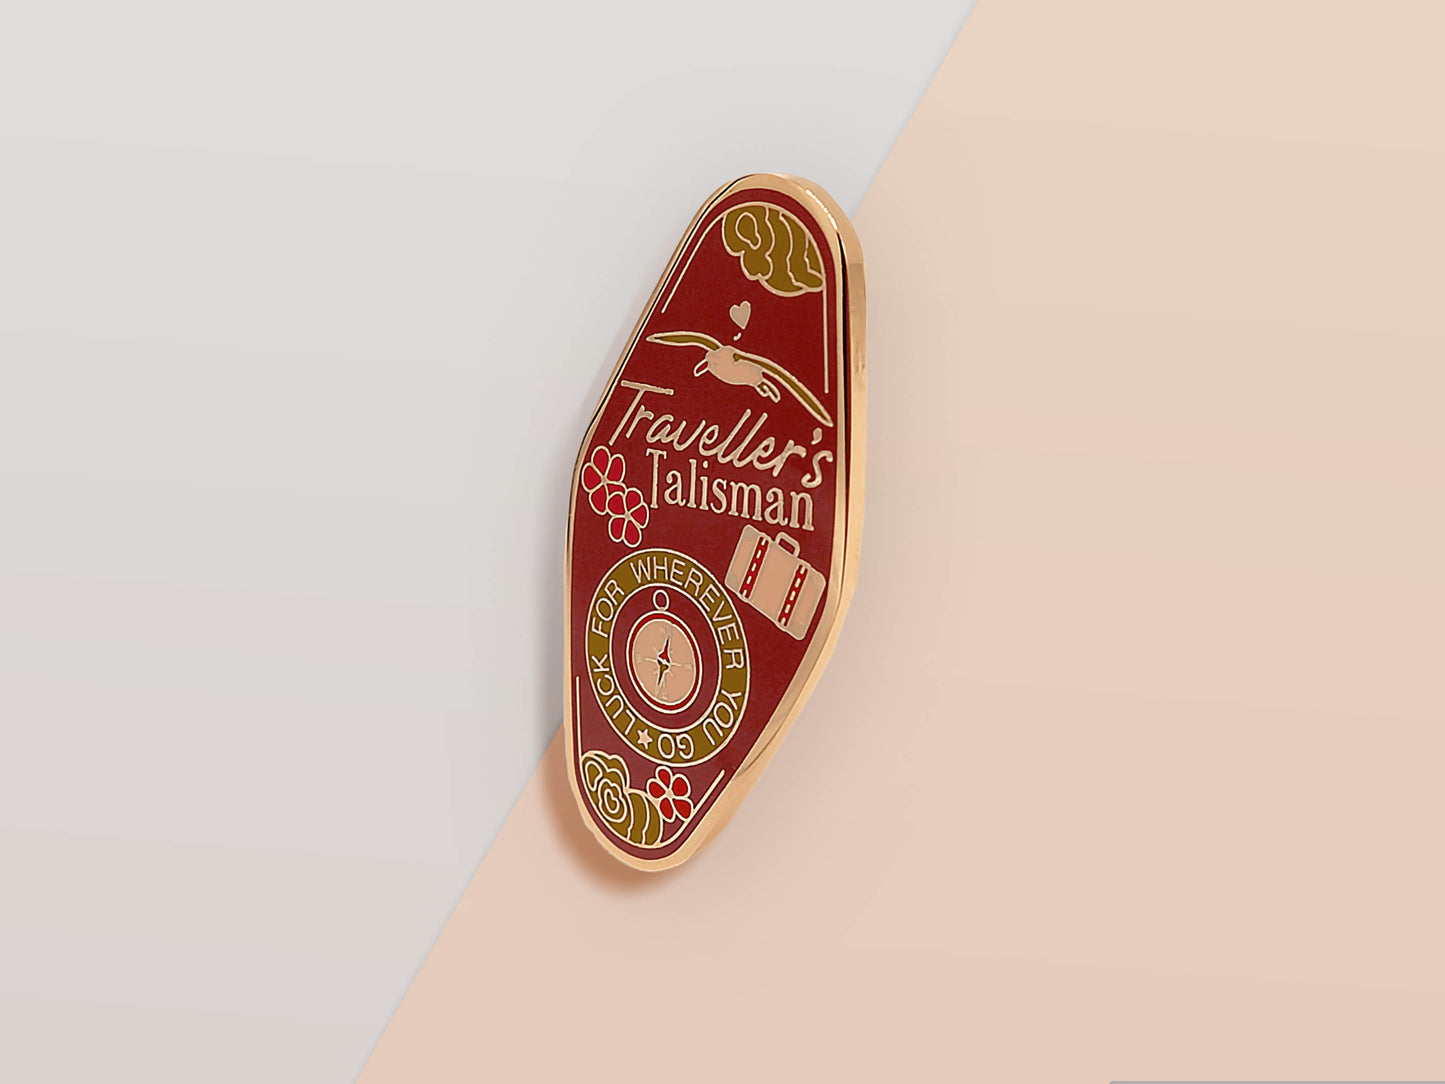 Gold Enamel Talisman Pin with Brown design and the words Traveller's Talisman.